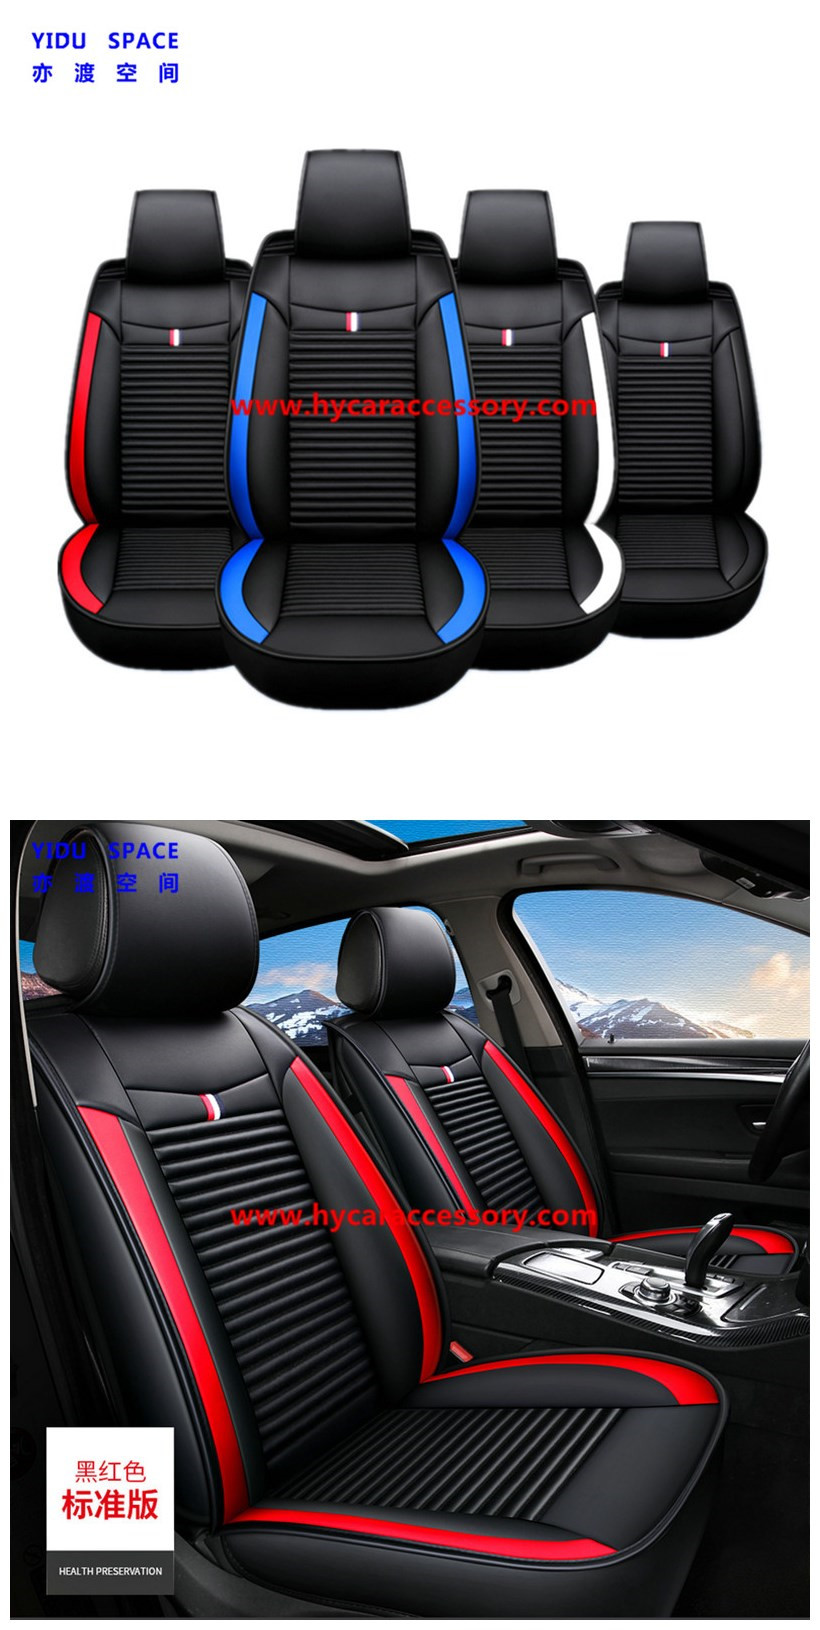 Car Interior Accessories 2 Packs Cushion Pad Mat Protector for Auto HYUGO Car Seat Cover Universal for Sedan Hatchback SUV